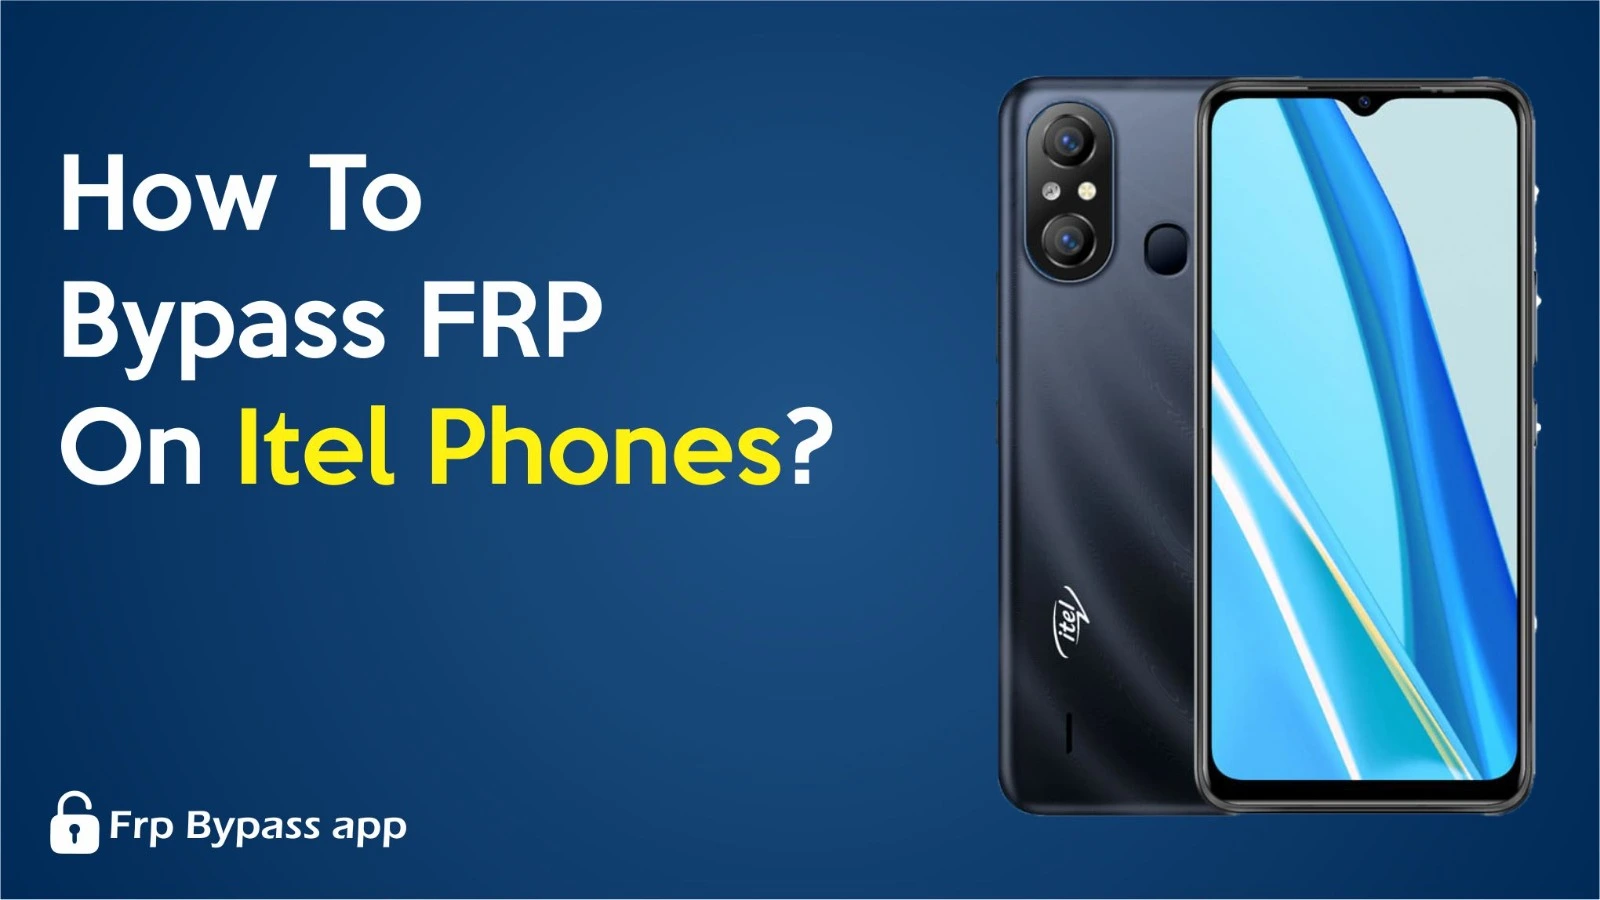 Bypass FRP On ITEL Phones image